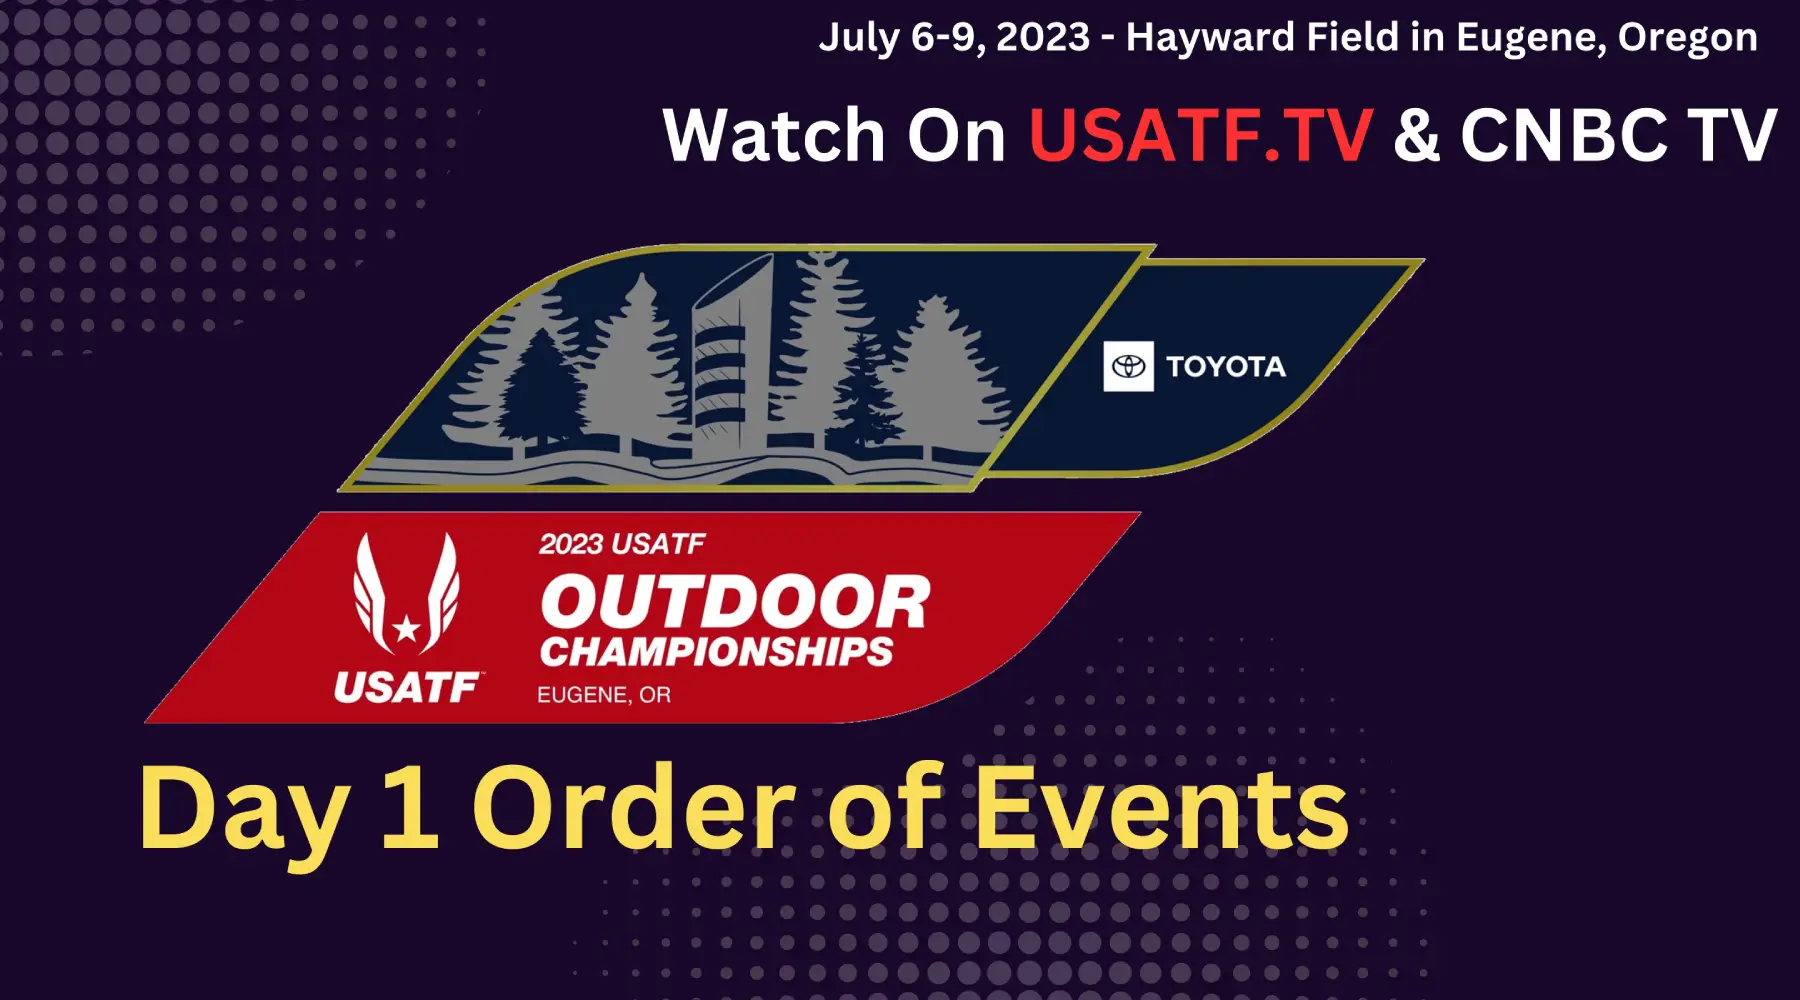 Day 1: How to watch 2023 USATF Championships, order of event schedule